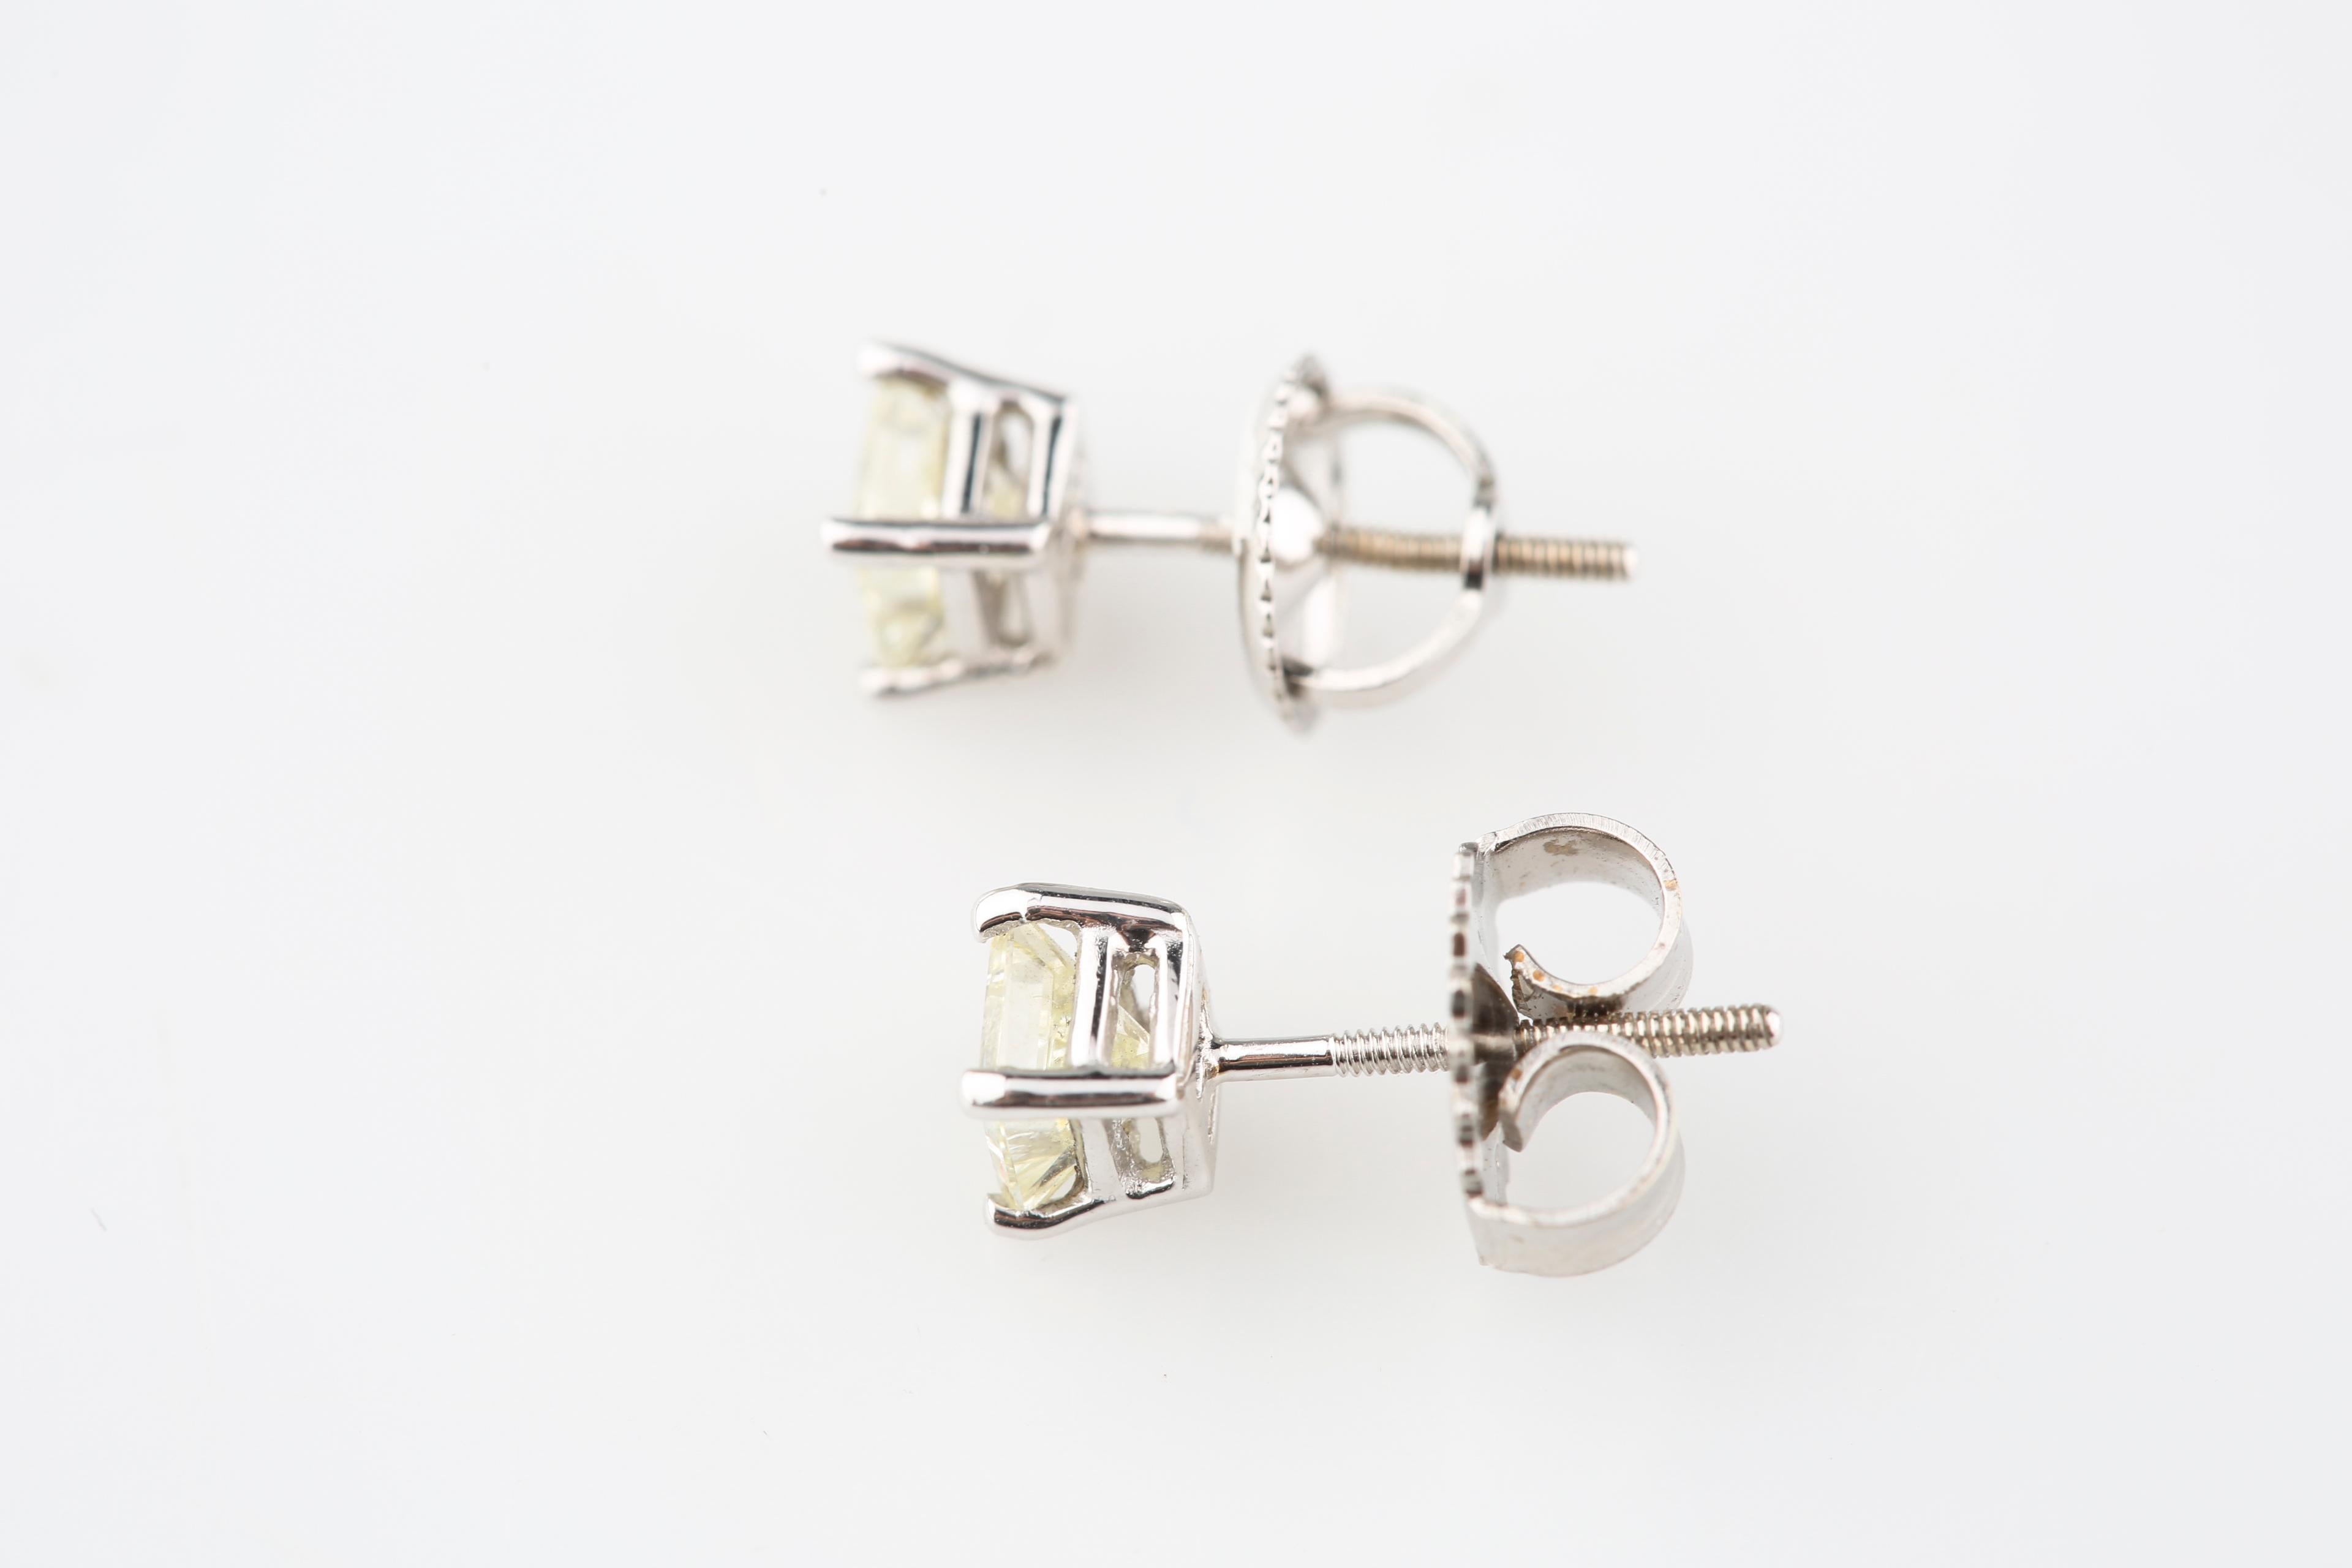 Beautiful Four-Prong Set Princess Cut Stud Earrings
Total Carat Weight = 0.69 Cts
Average Color = K
Average Clarity = SI2
Total Mass = 0.80 grams
Gorgeous Gift!